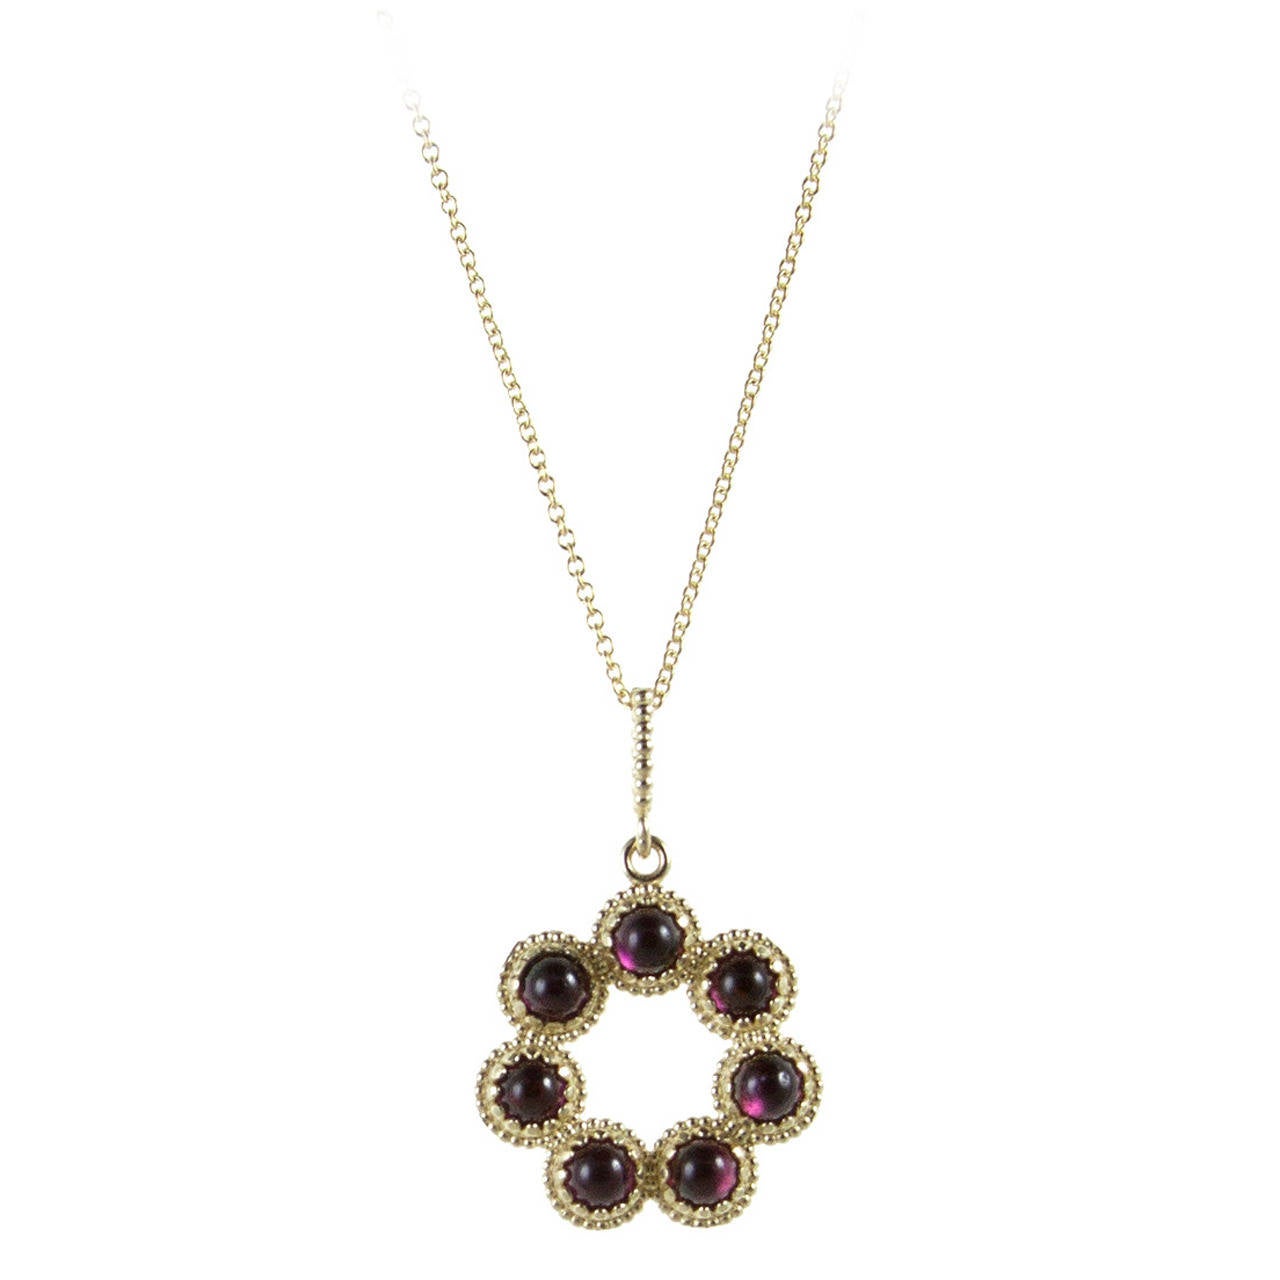 Circlet of Garnet Cabochons set in 14k Yellow Gold. For Sale